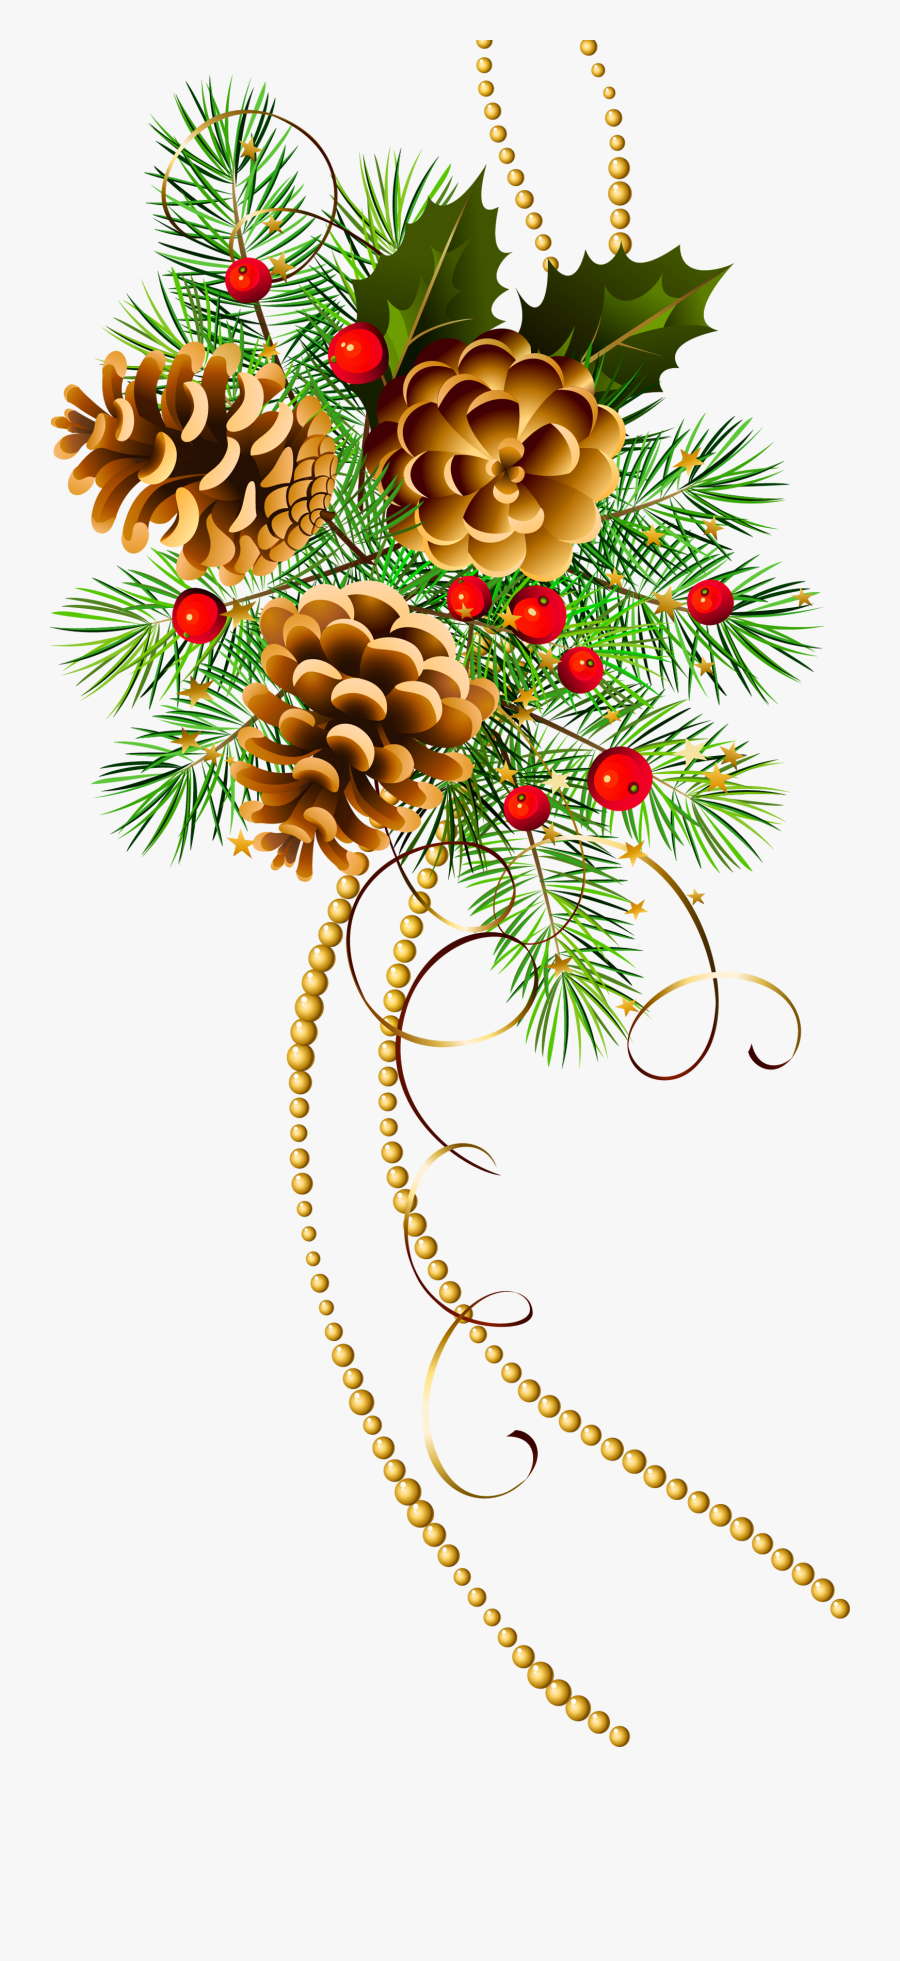 Three Christmas Cones With - Christmas Pine Cone Clipart, Transparent Clipart